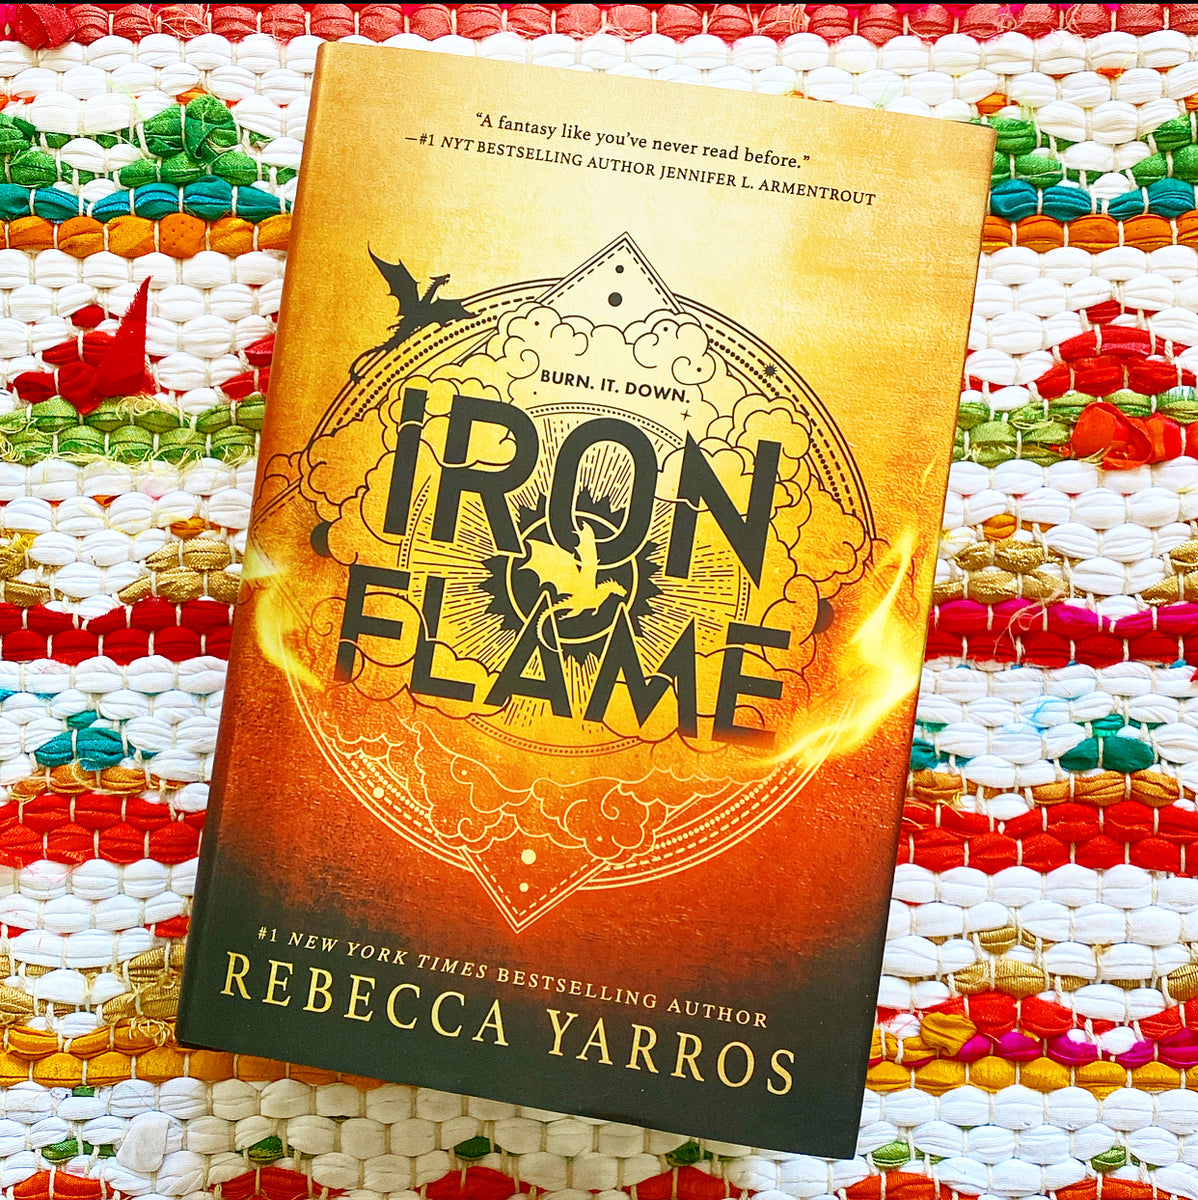 Iron Flame (The Empyrean Book 2) by Rebecca Yarros Limited Edition by  Rebecca Yarros, Hardcover | Pangobooks